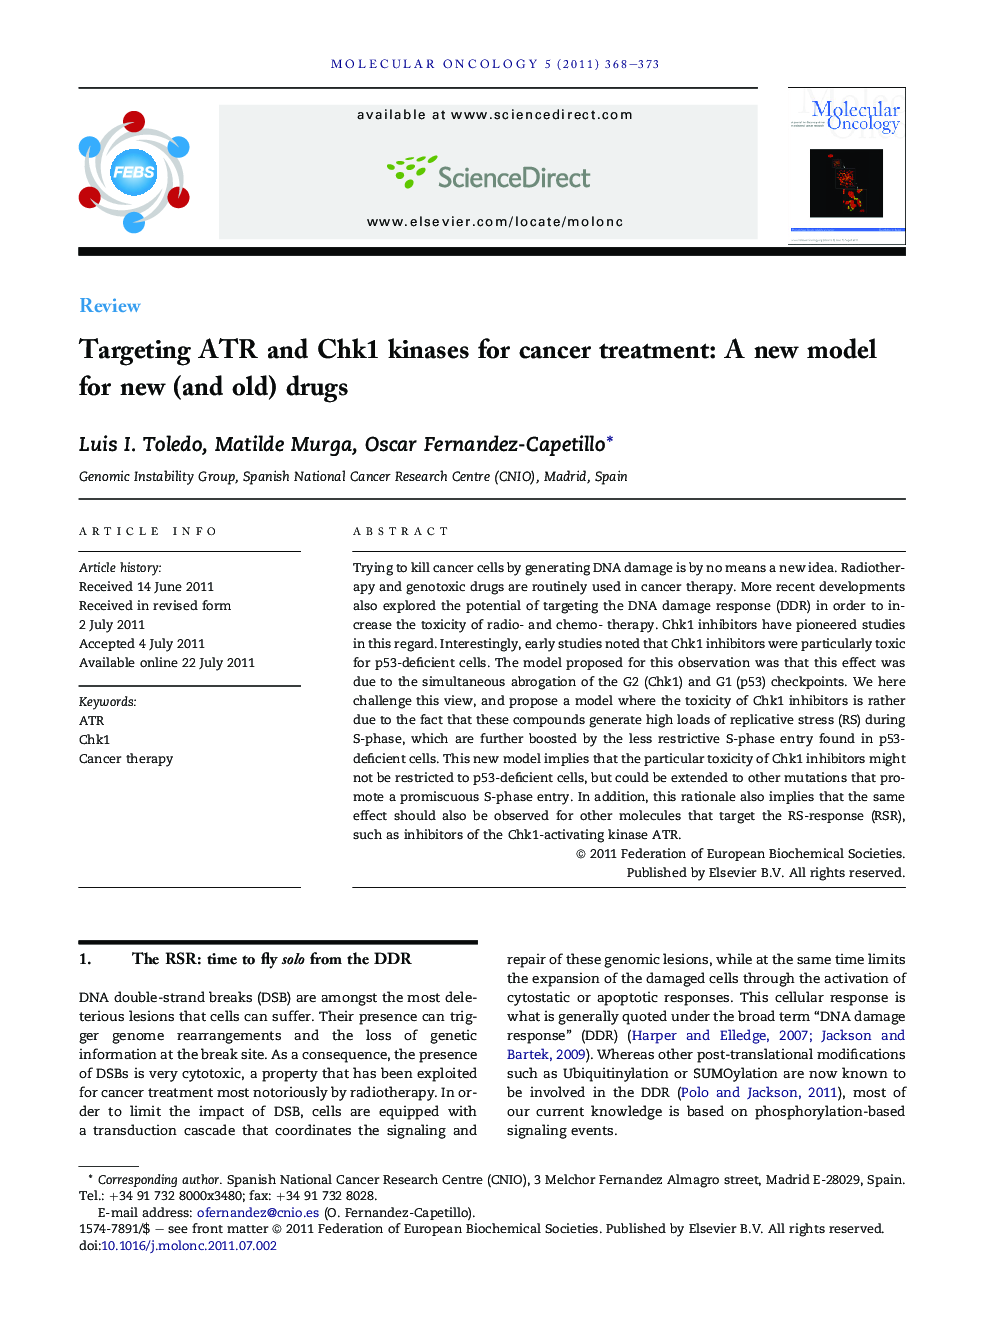 Targeting ATR and Chk1 kinases for cancer treatment: A new model for new (and old) drugs